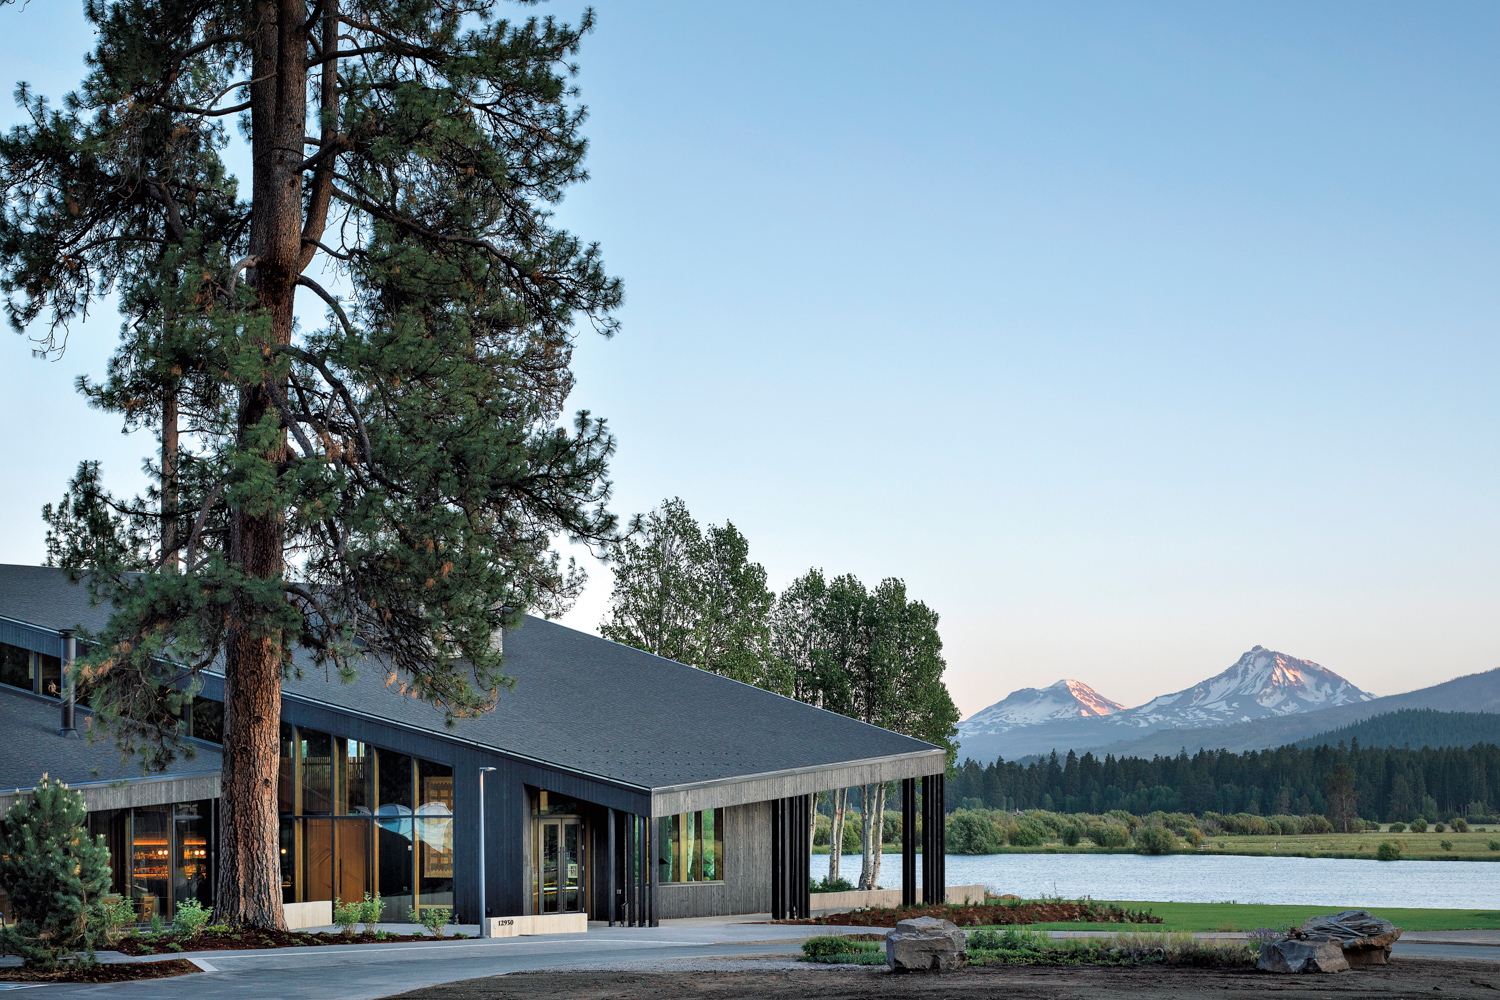 Exterior of building with sloping black roof and expansive glass walls overlooking a lake